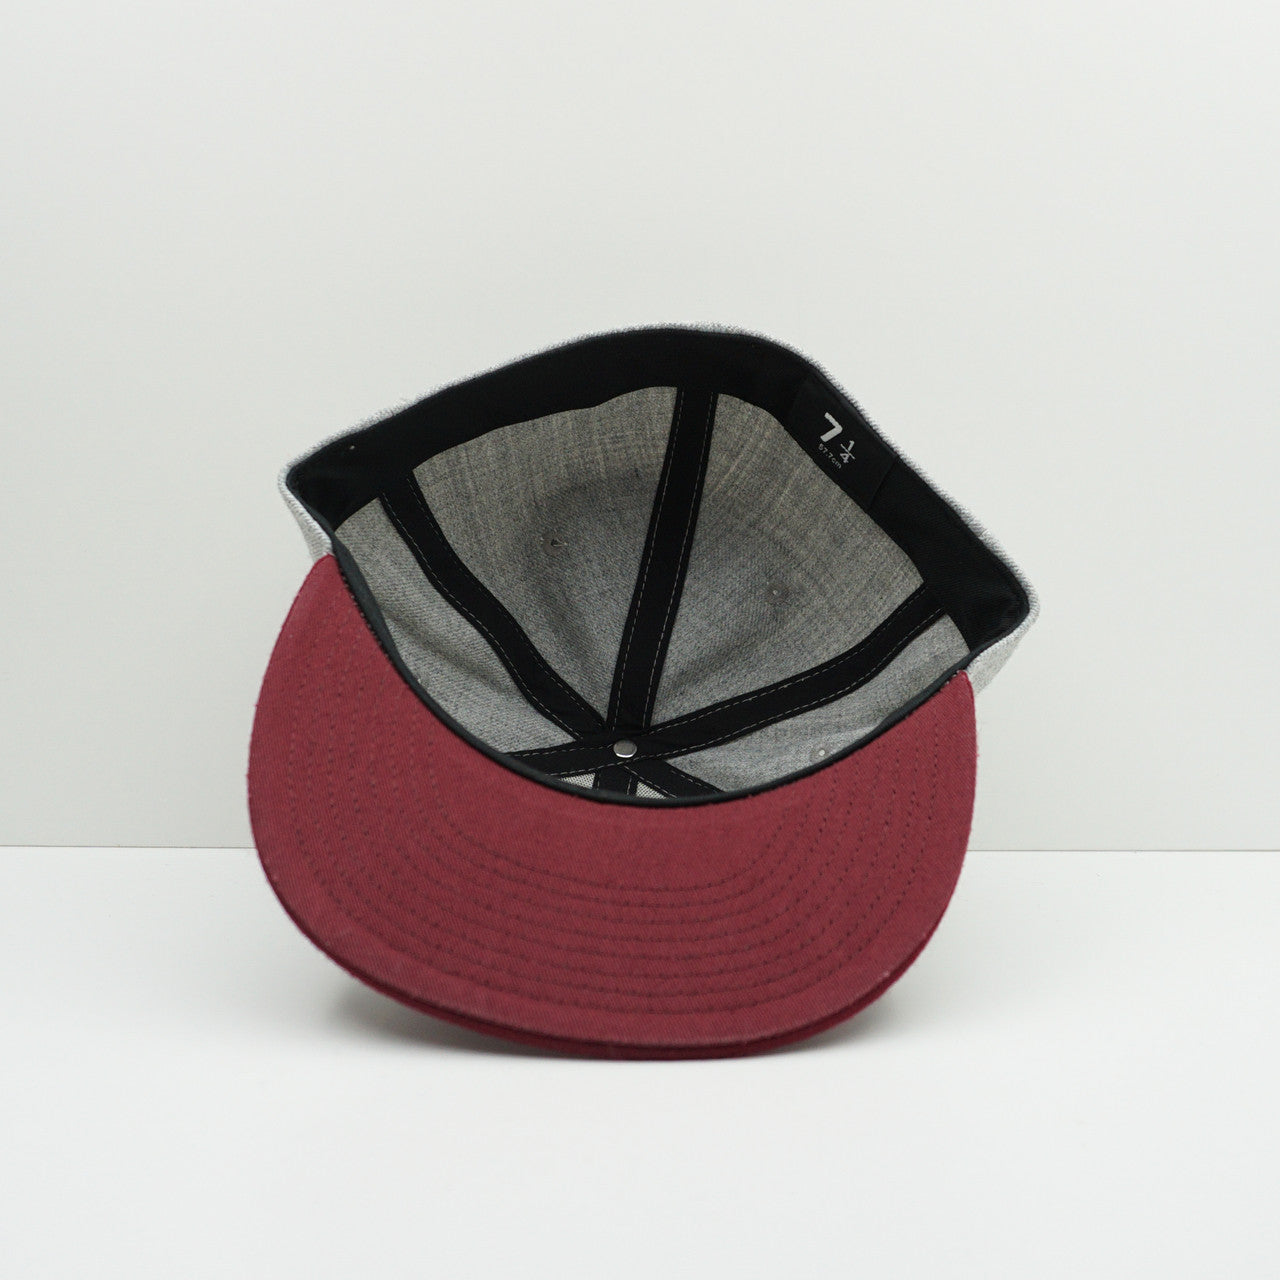 New Era Grey/Red Fitted Cap